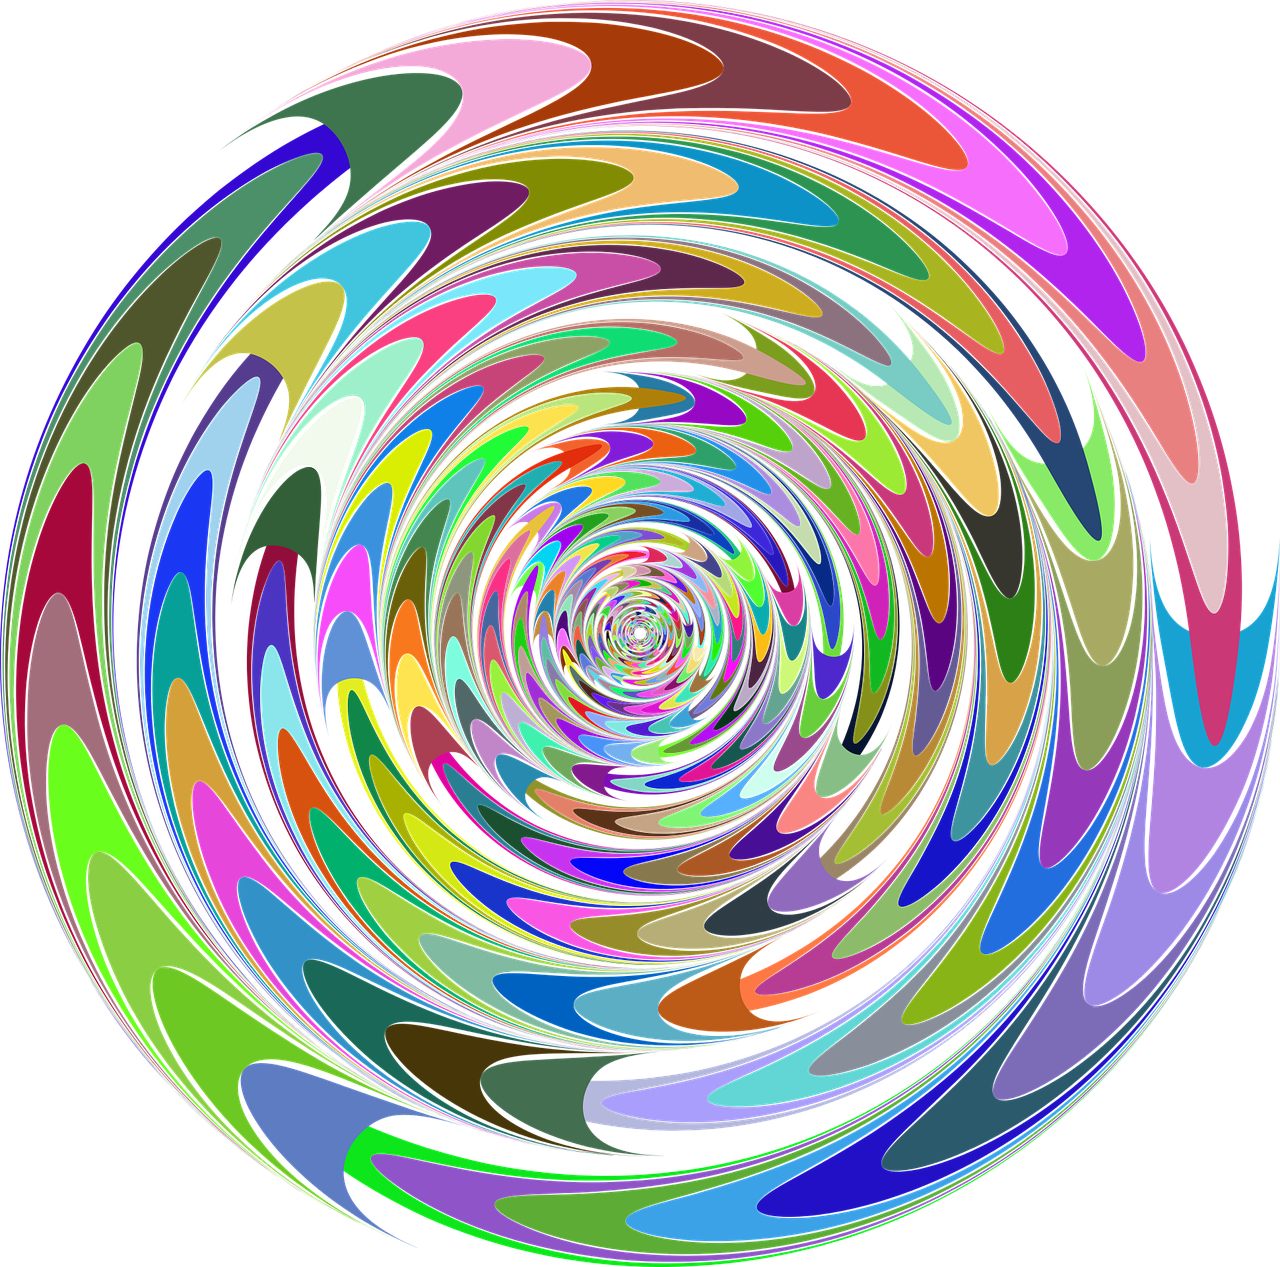 free hypnosis images